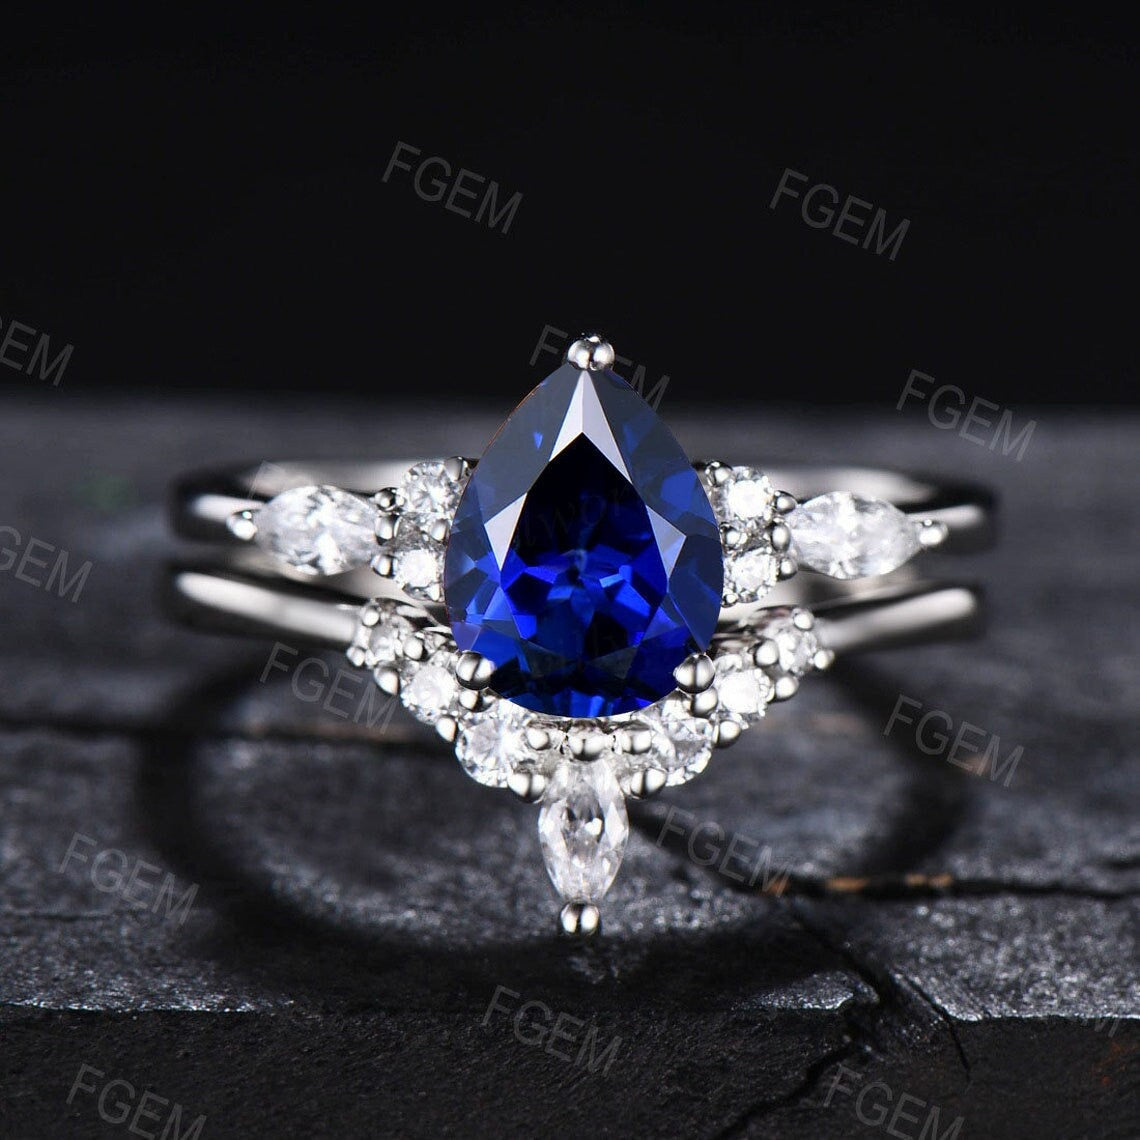 Sterling Silver Blue Sapphire Engagement Ring Set Vintage 1.25ct Pear Shaped Blue Sapphire Bridal Set September Birthstone Gift Promise Ring